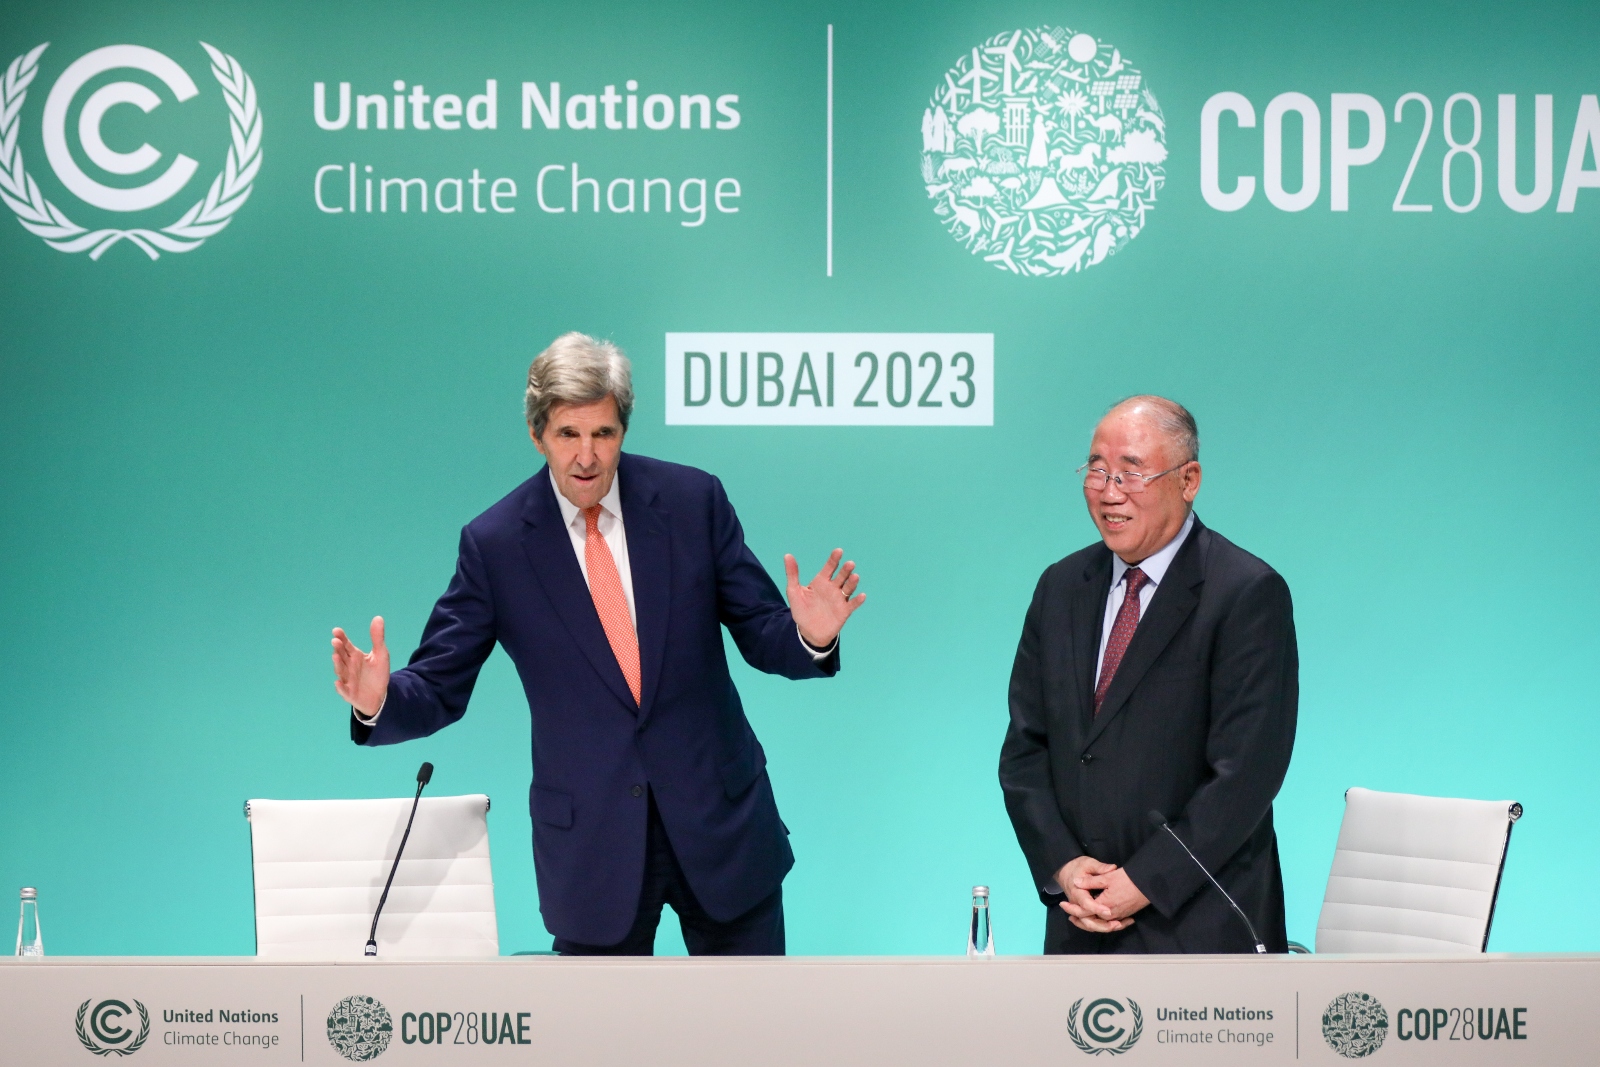 U.S. climate envoy John Kerry and his Chinese counterpart Xie Zhenhua speak at COP28 in the United Arab Emirates. The two diplomats worked together for years on climate issues.